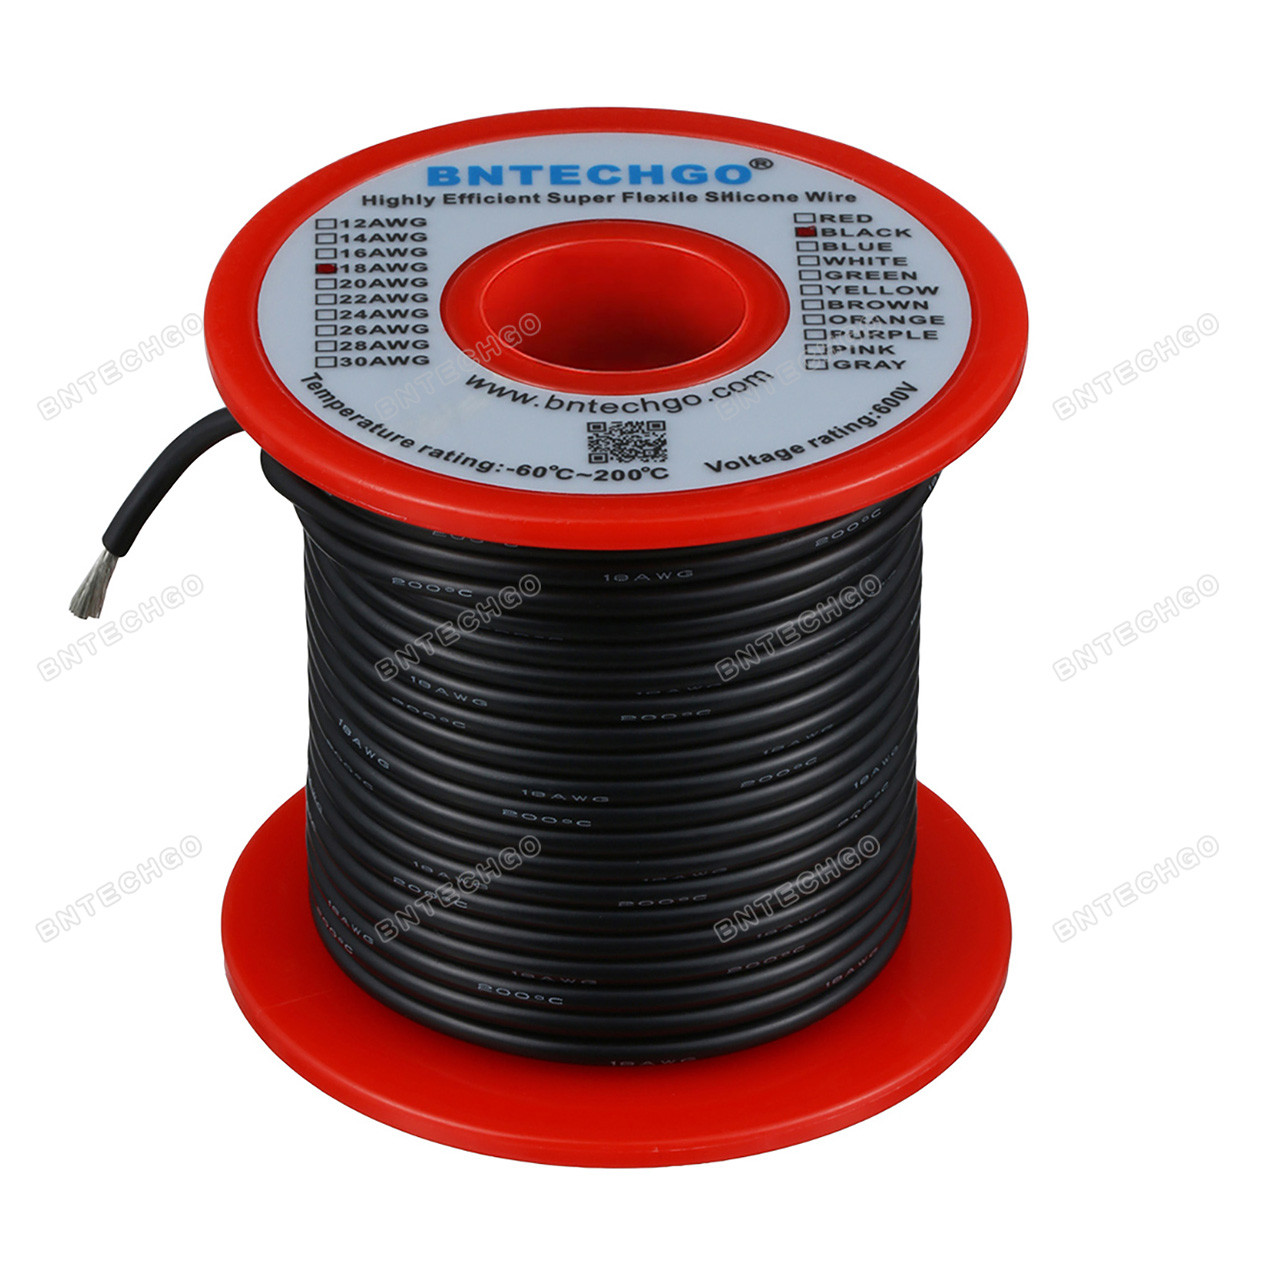 BNTECHGO 18 Gauge Silicone Wire Spool Black 100 feet Ultra Flexible High  Temp 200 deg C 600V 18AWG Silicone Rubber Wire 150 Strands of Tinned Copper